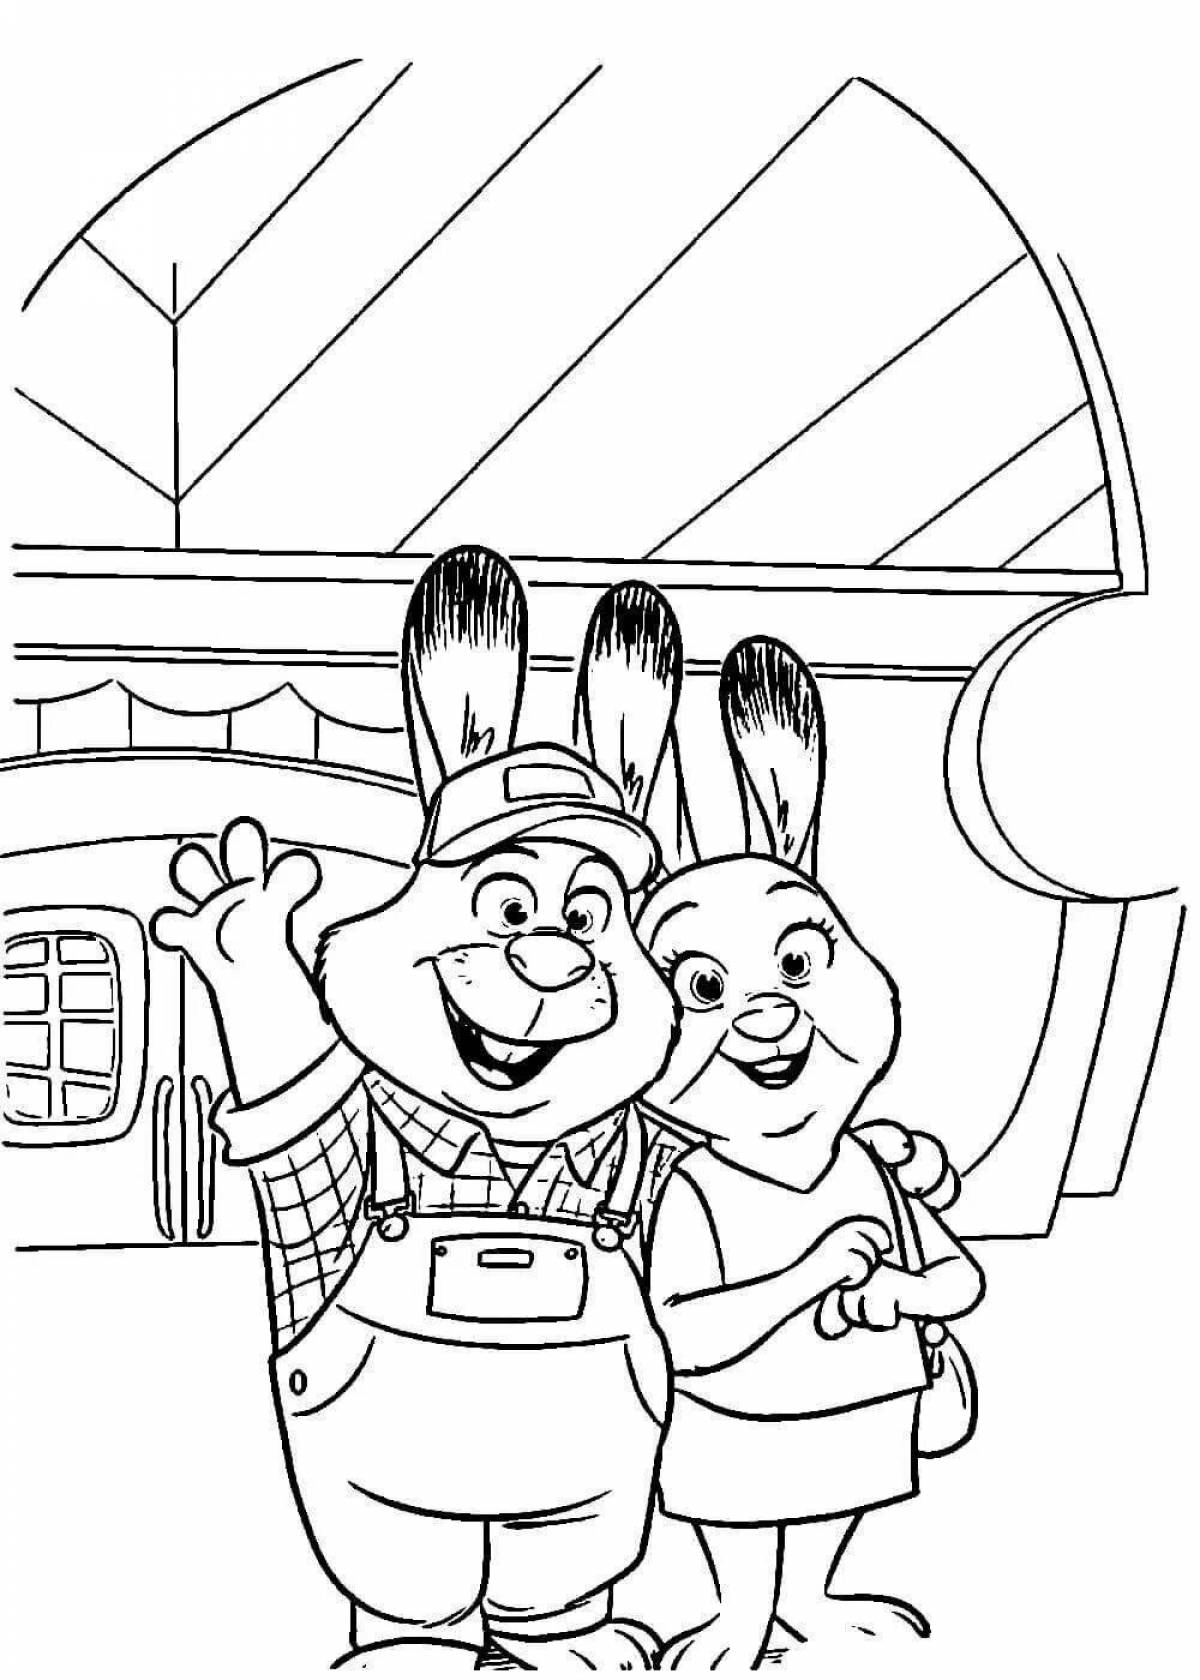 Quirky judy hops coloring book